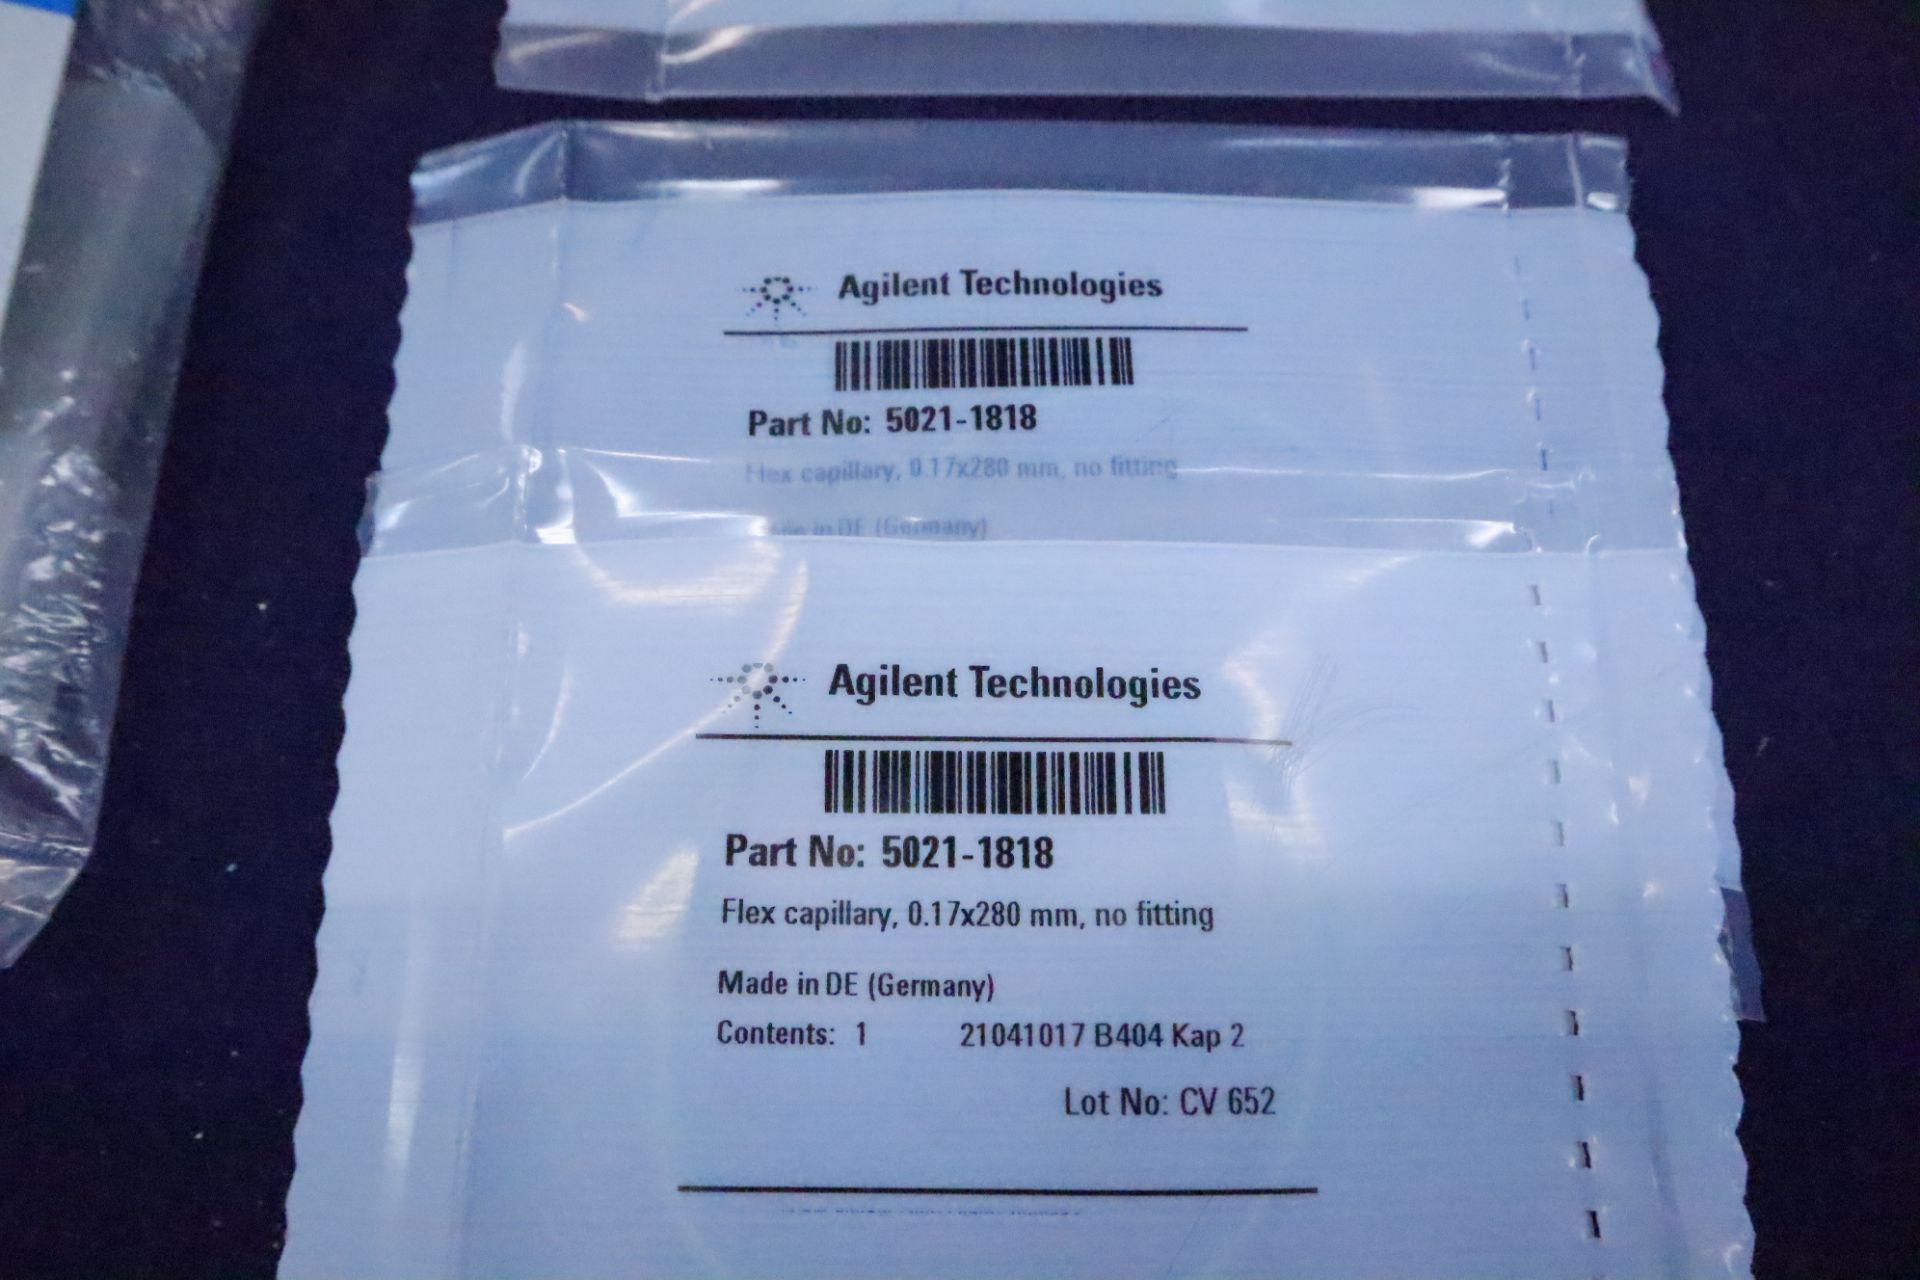 UPDATED PHOTOS Agilent Technologies OEM Replacement Parts and tool kits for LC/MS Machines - Image 25 of 37